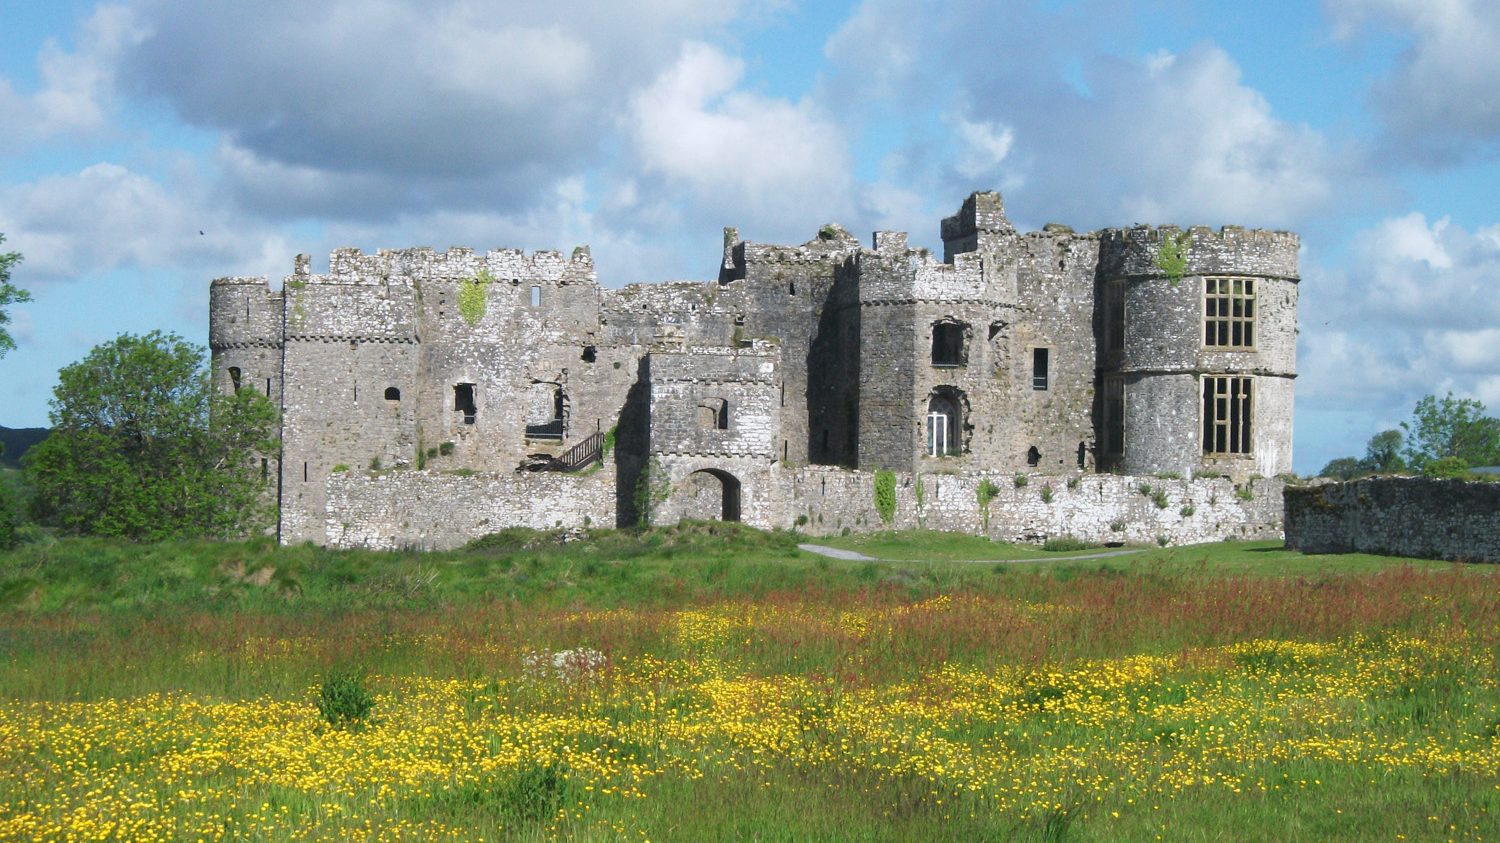 Wildflowers growing at Carew Castle, Pembrokeshire Coast National Park, Wales, UK